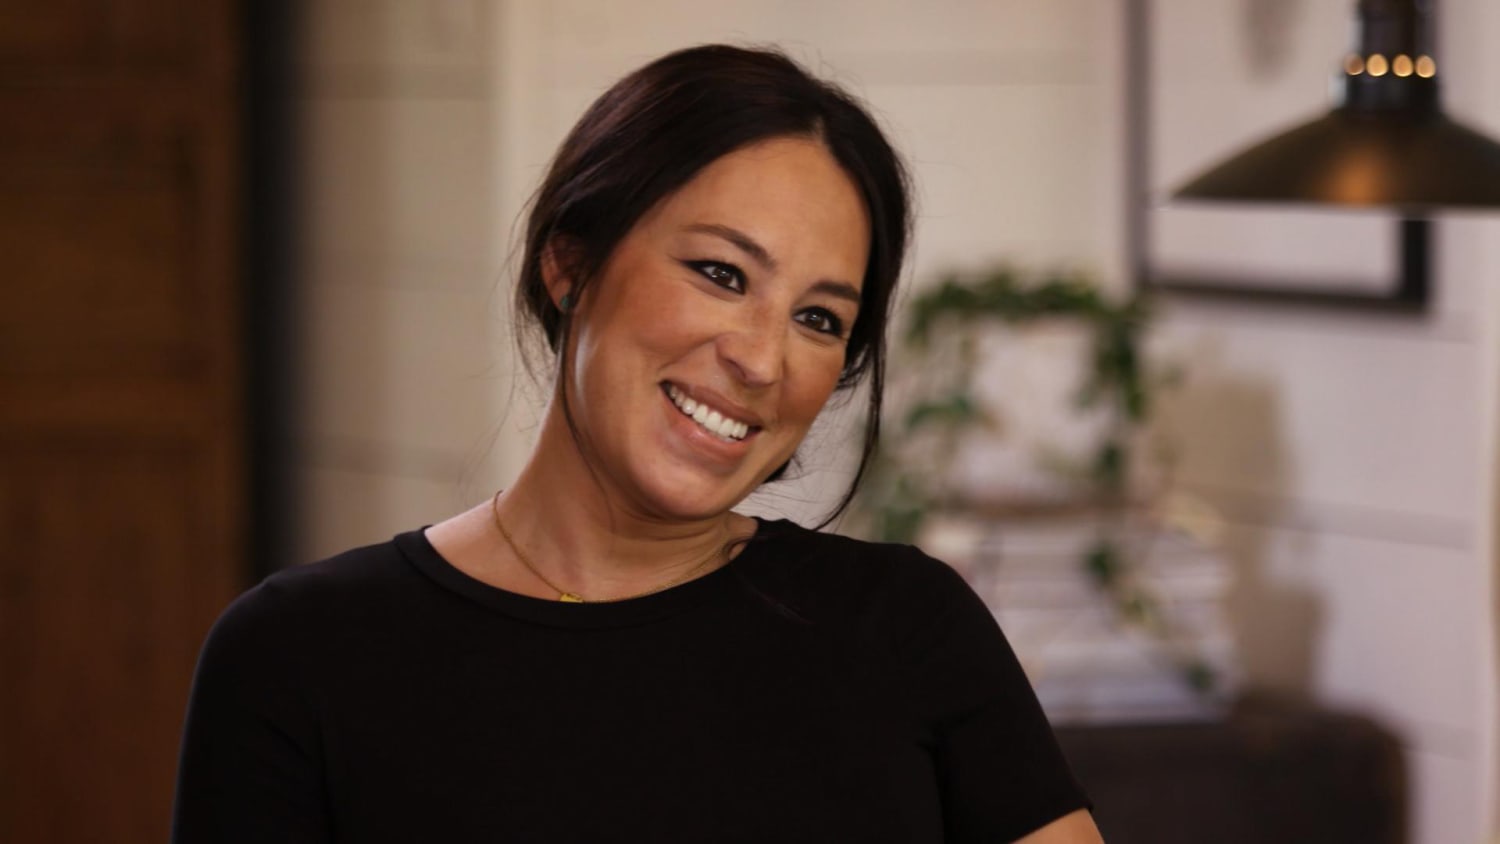 Joanna Gaines reveals what she learned after having her 4th child.